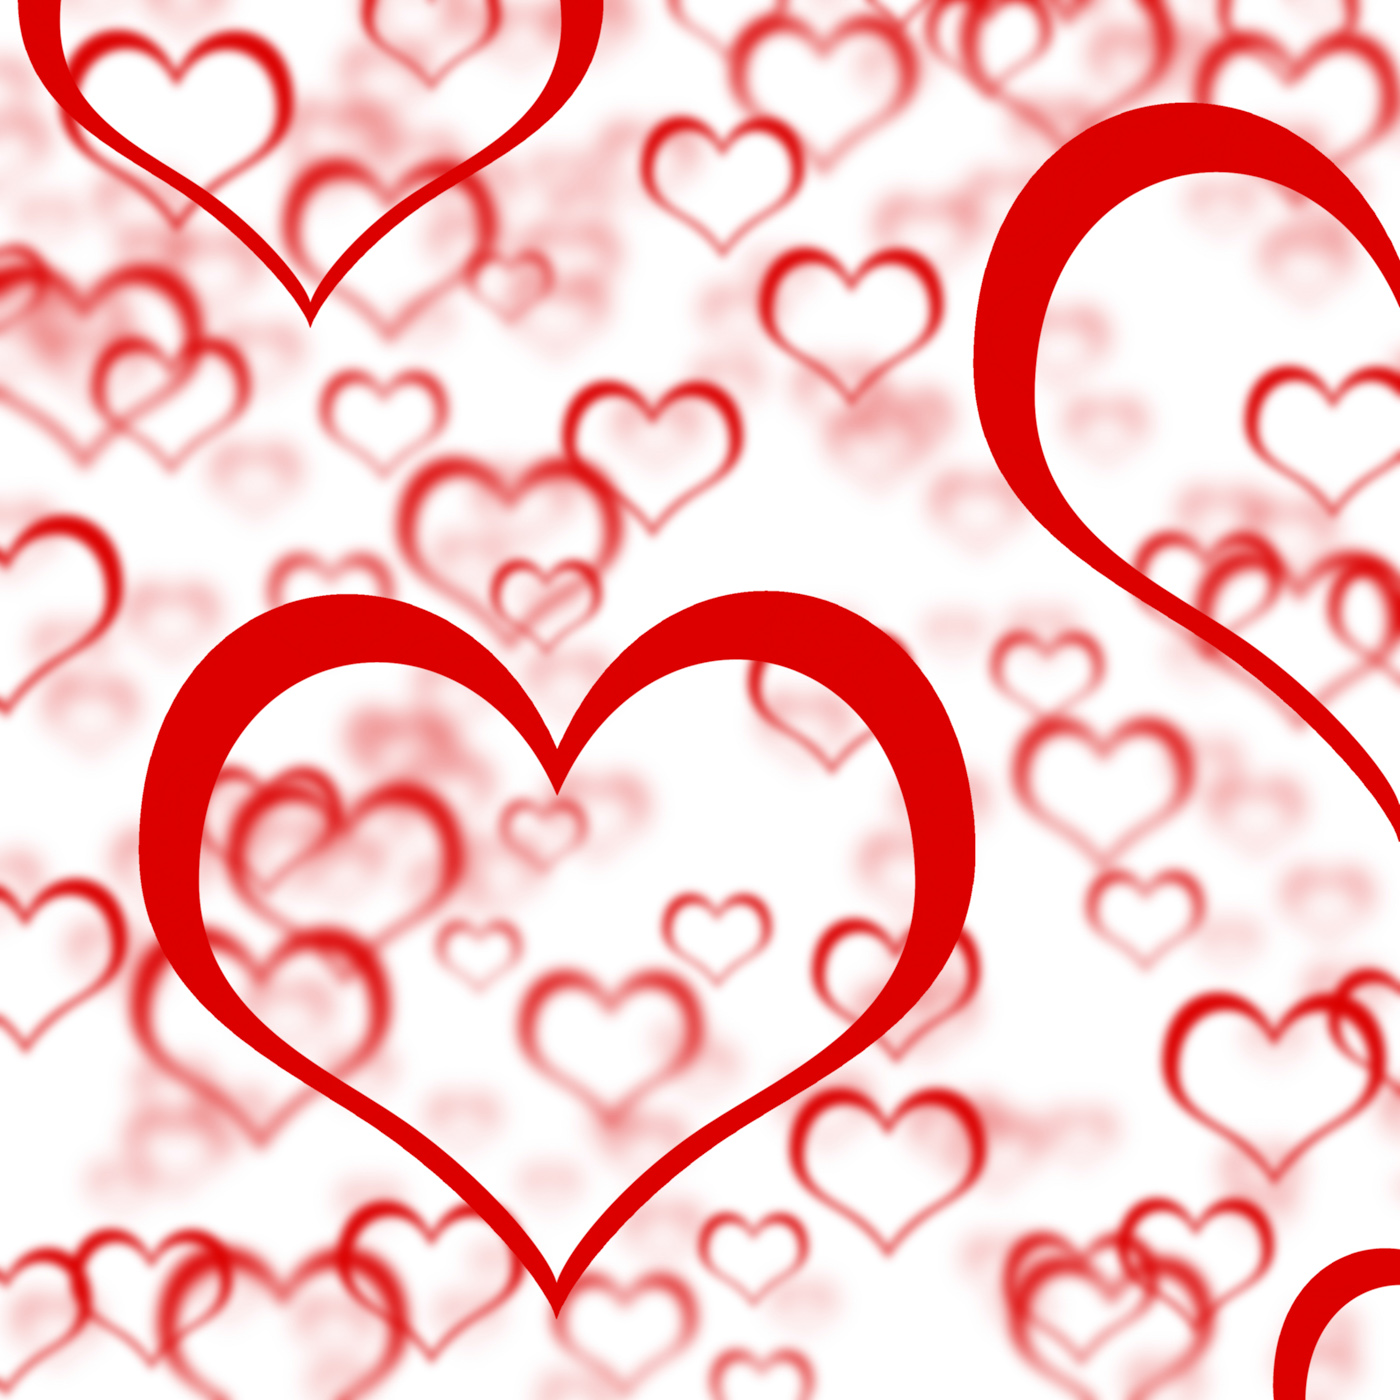 Red hearts background showing romance love and valentines photo